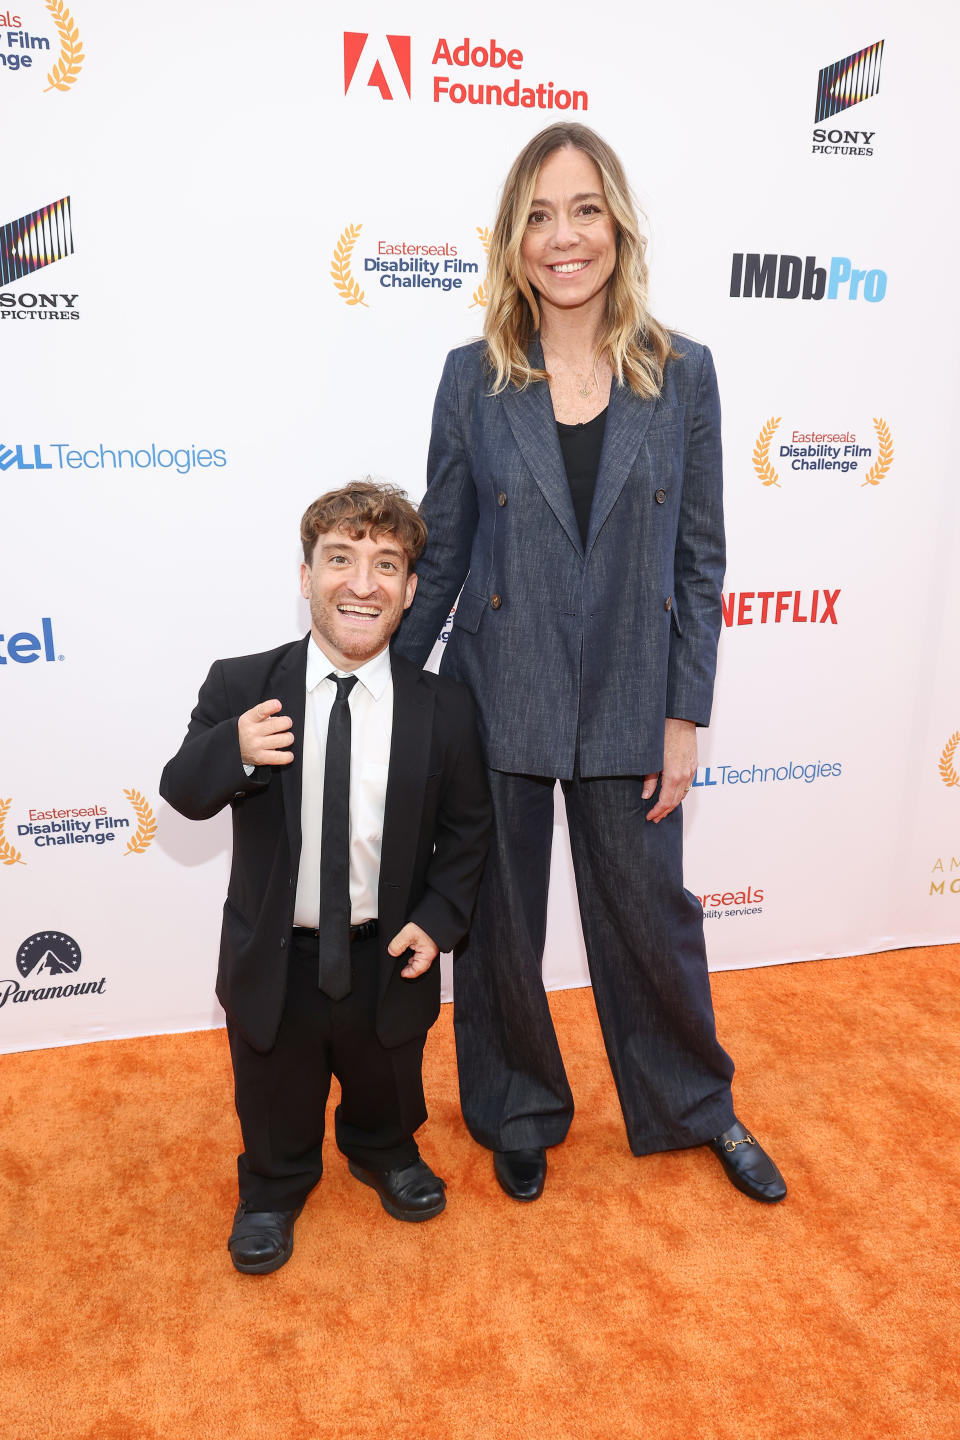 Nic Novicki and Siân Heder attend the 11th Annual Easterseals Disability Film Challenge Awards